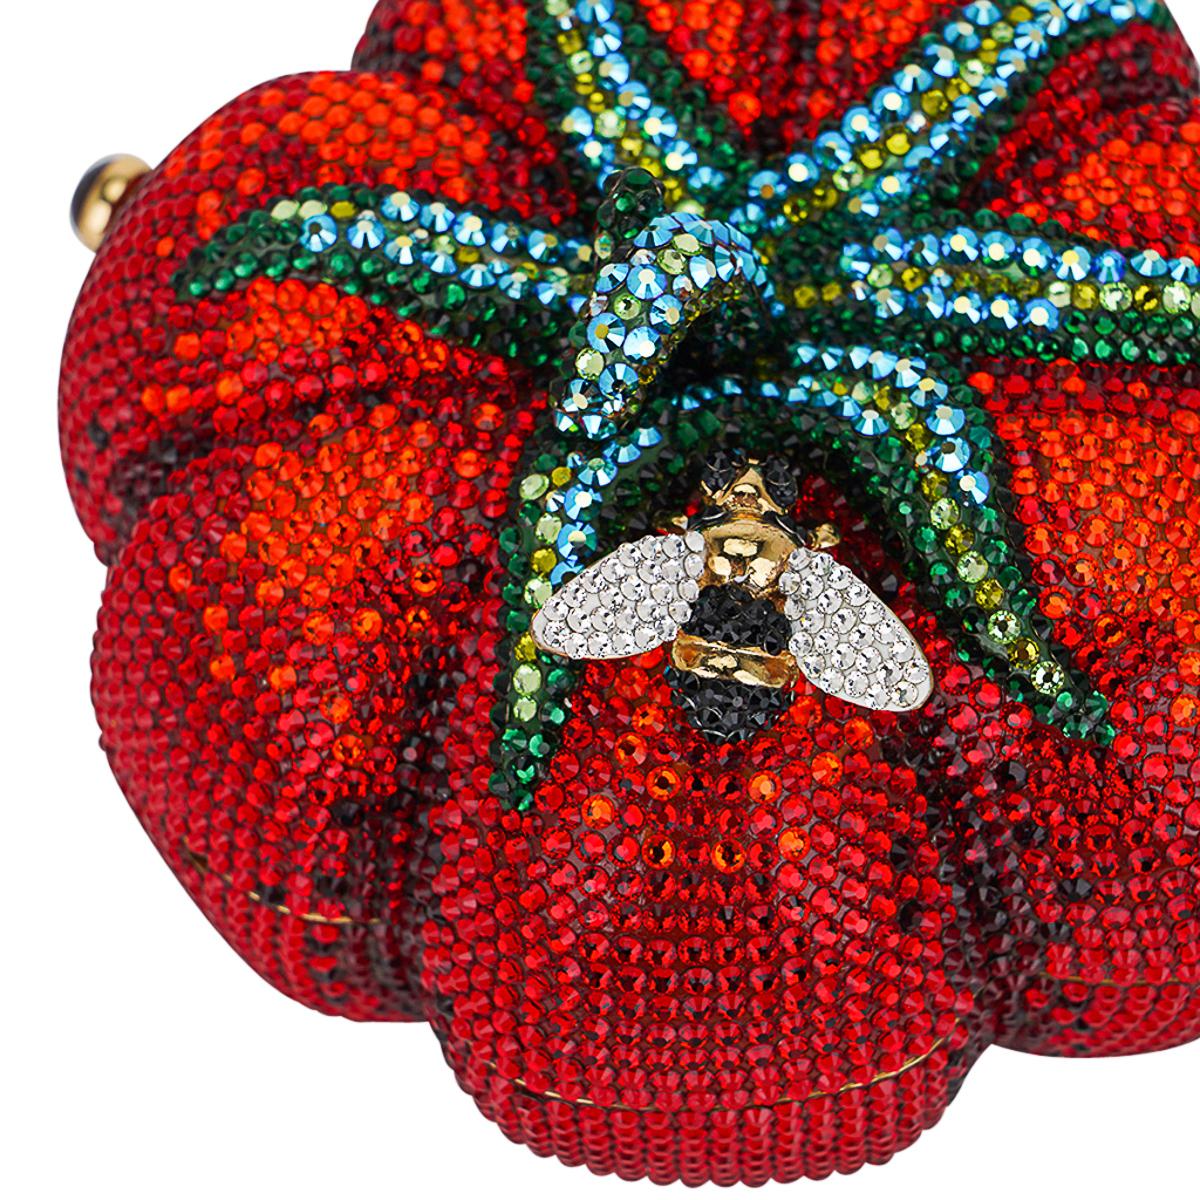 Utterly exquisite Collector's Edition Judith Leiber Couture Heirloom evening bag.
Crystal encrusted minaudiere in the shape of a tomato with a small bee.
Hand placed crystals in red, blue and green.
The bold bee is adorned with black and clear